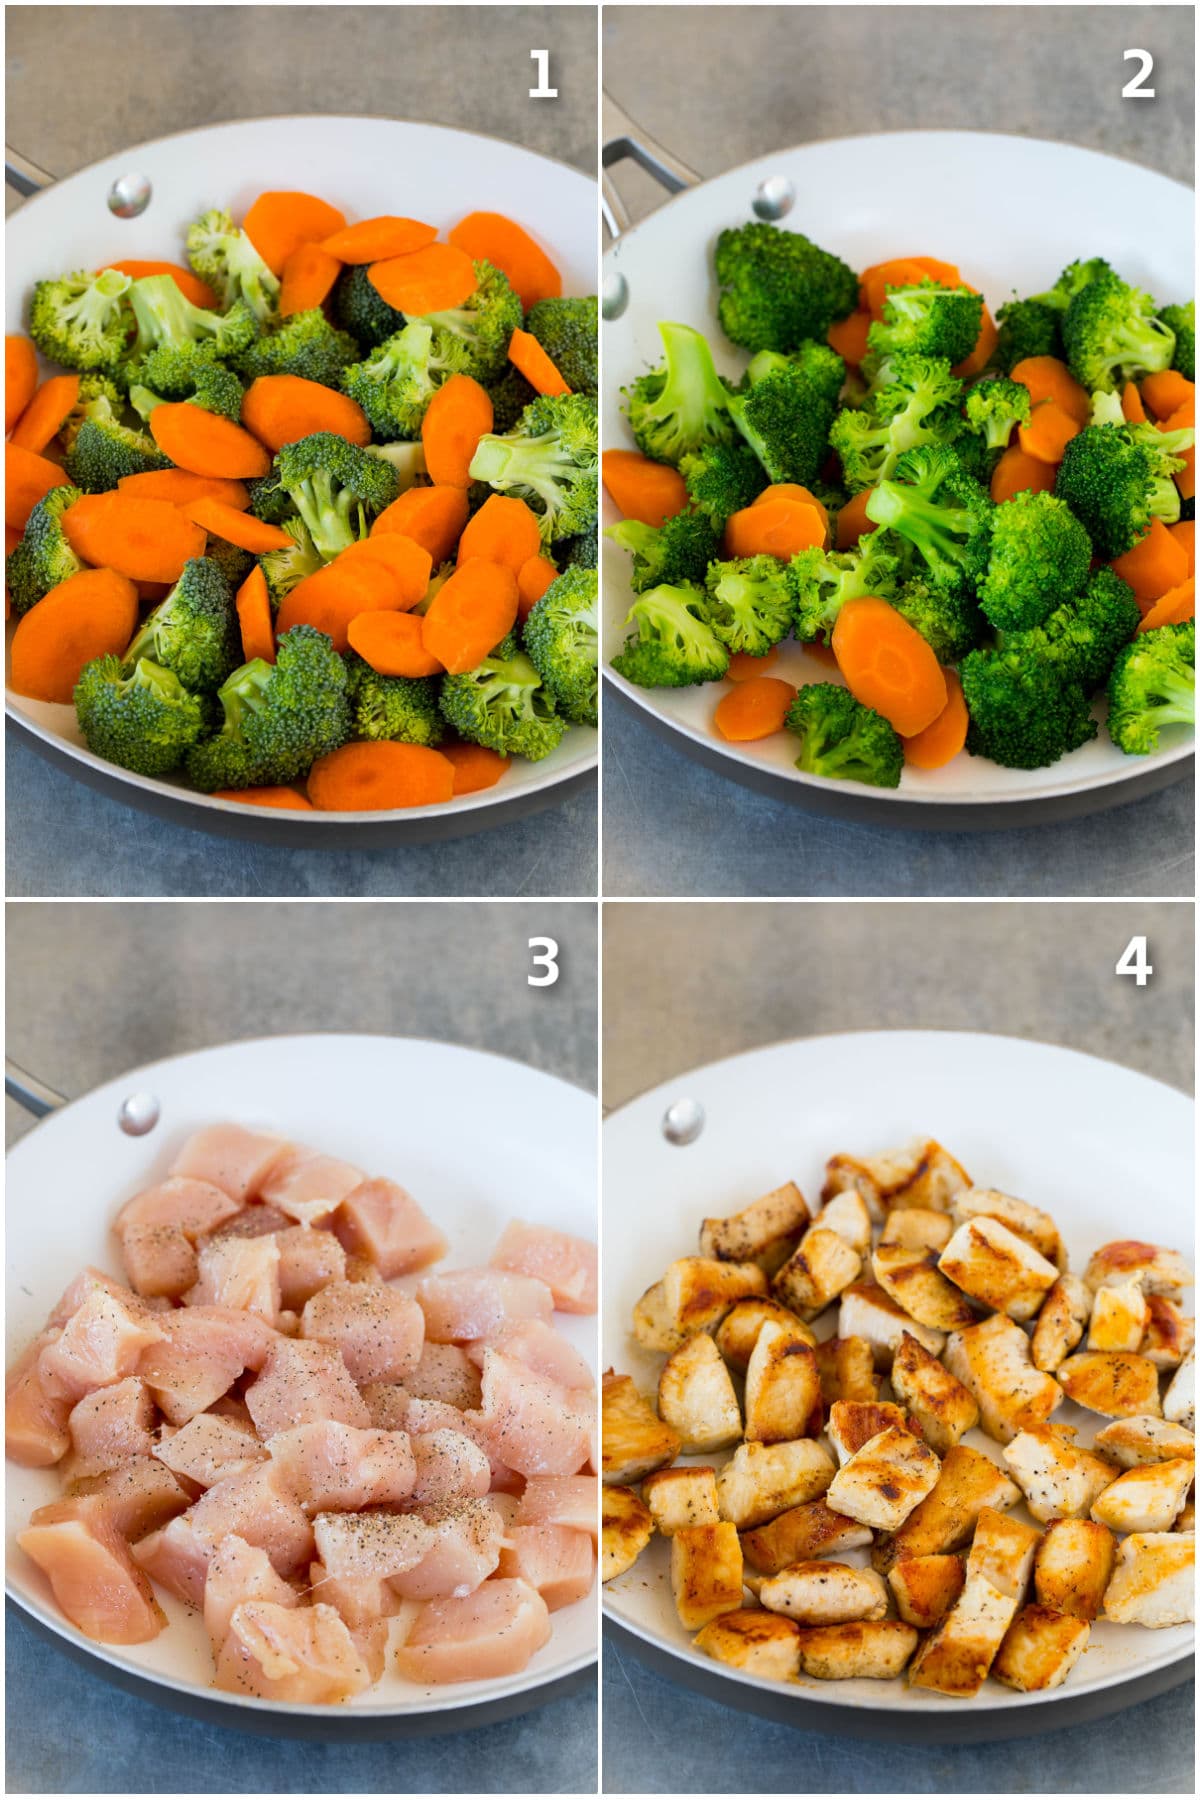 Process shots showing cooked and raw chicken and vegetables.